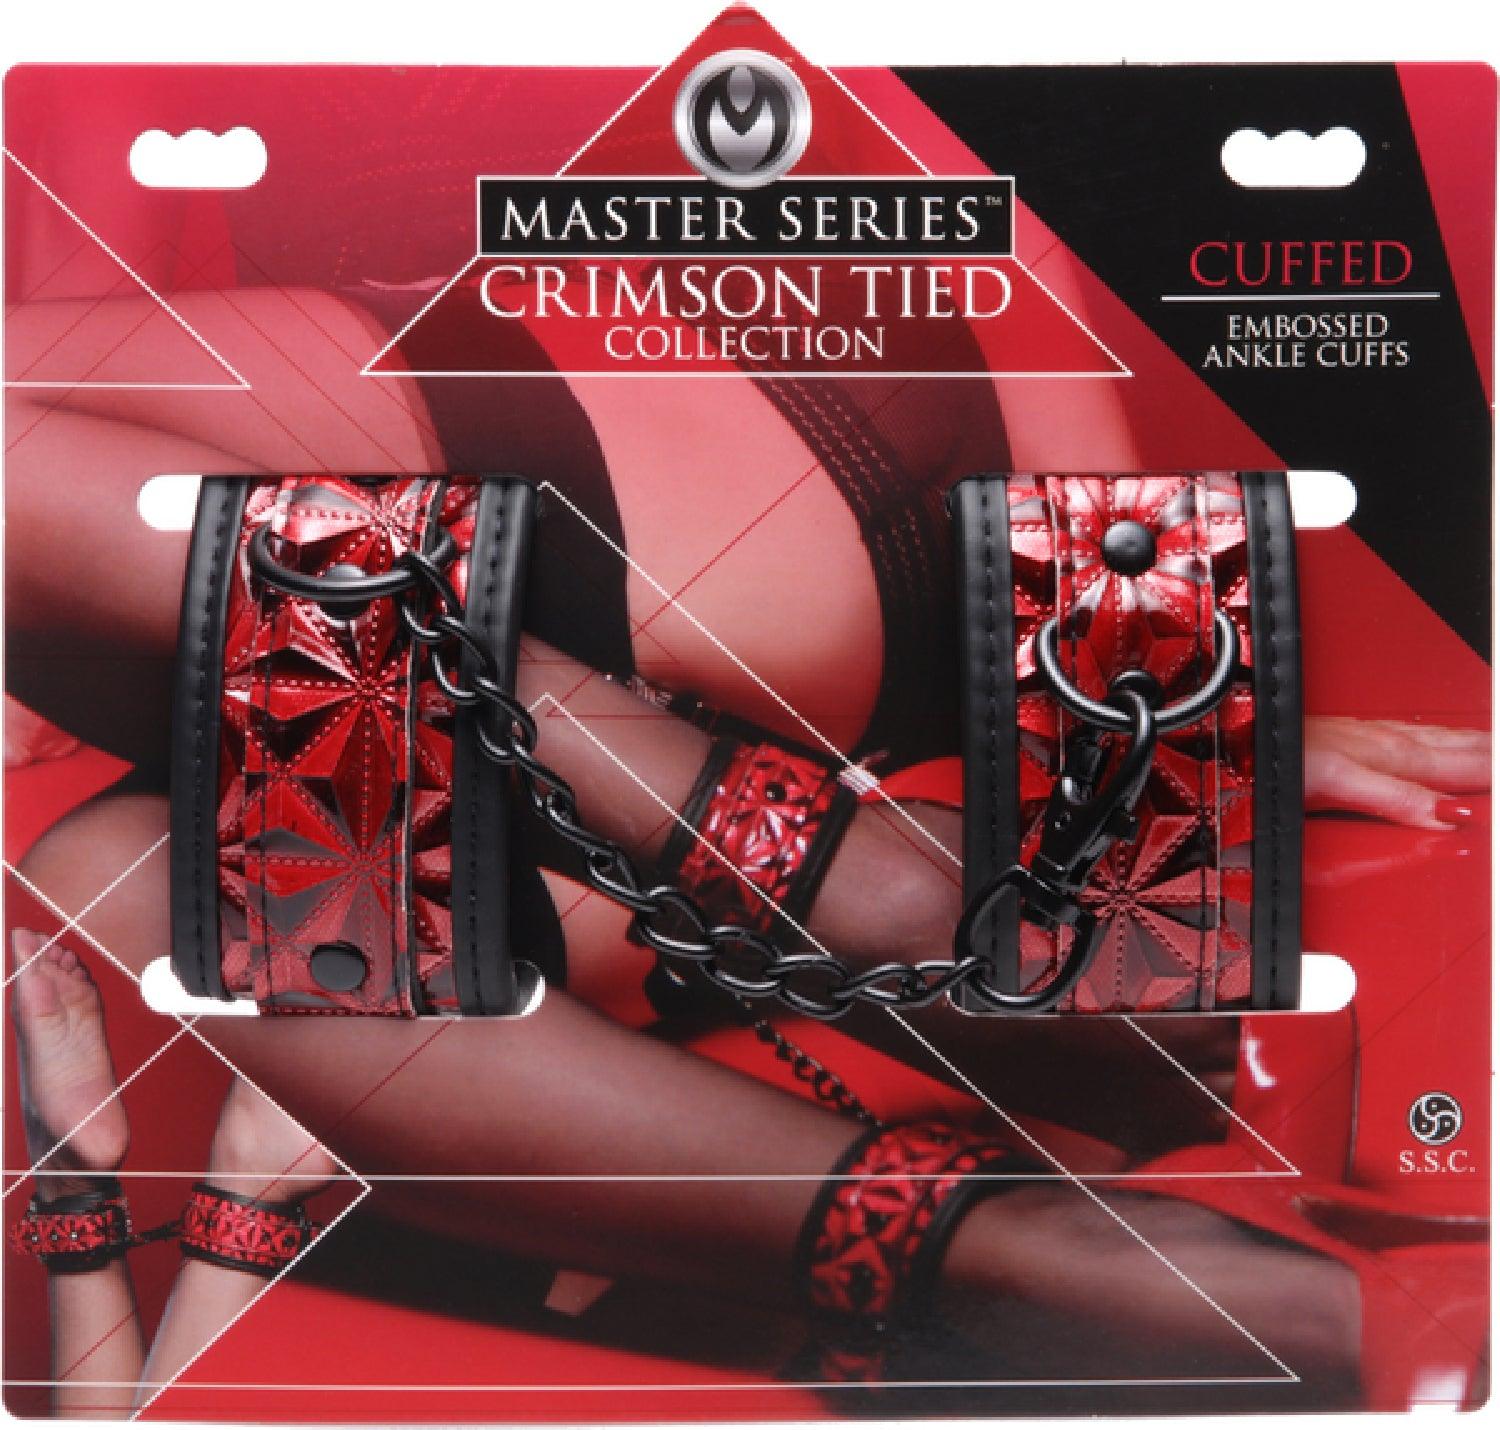 Crimson Tied Embossed Ankle Cuffs - Take A Peek